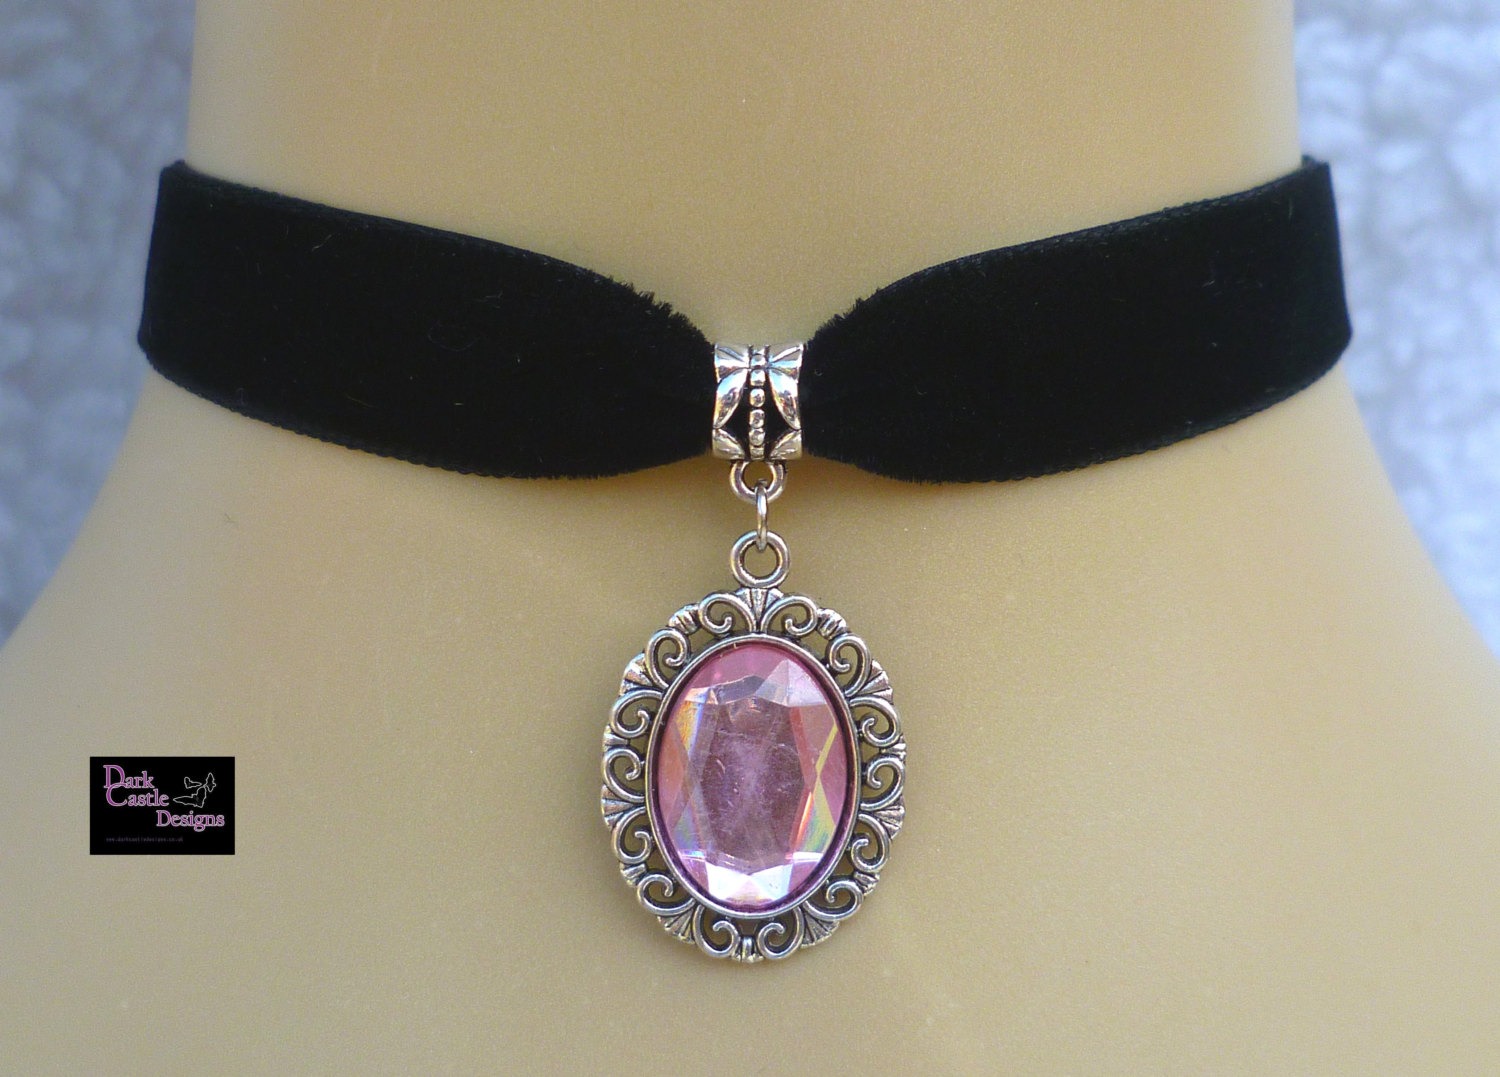 Black Velvet Choker/ Necklace with Baby Pink Acrylic Jewel Pendant Wicca Pagan gothic Steampunk Loloita steampunk buy now online